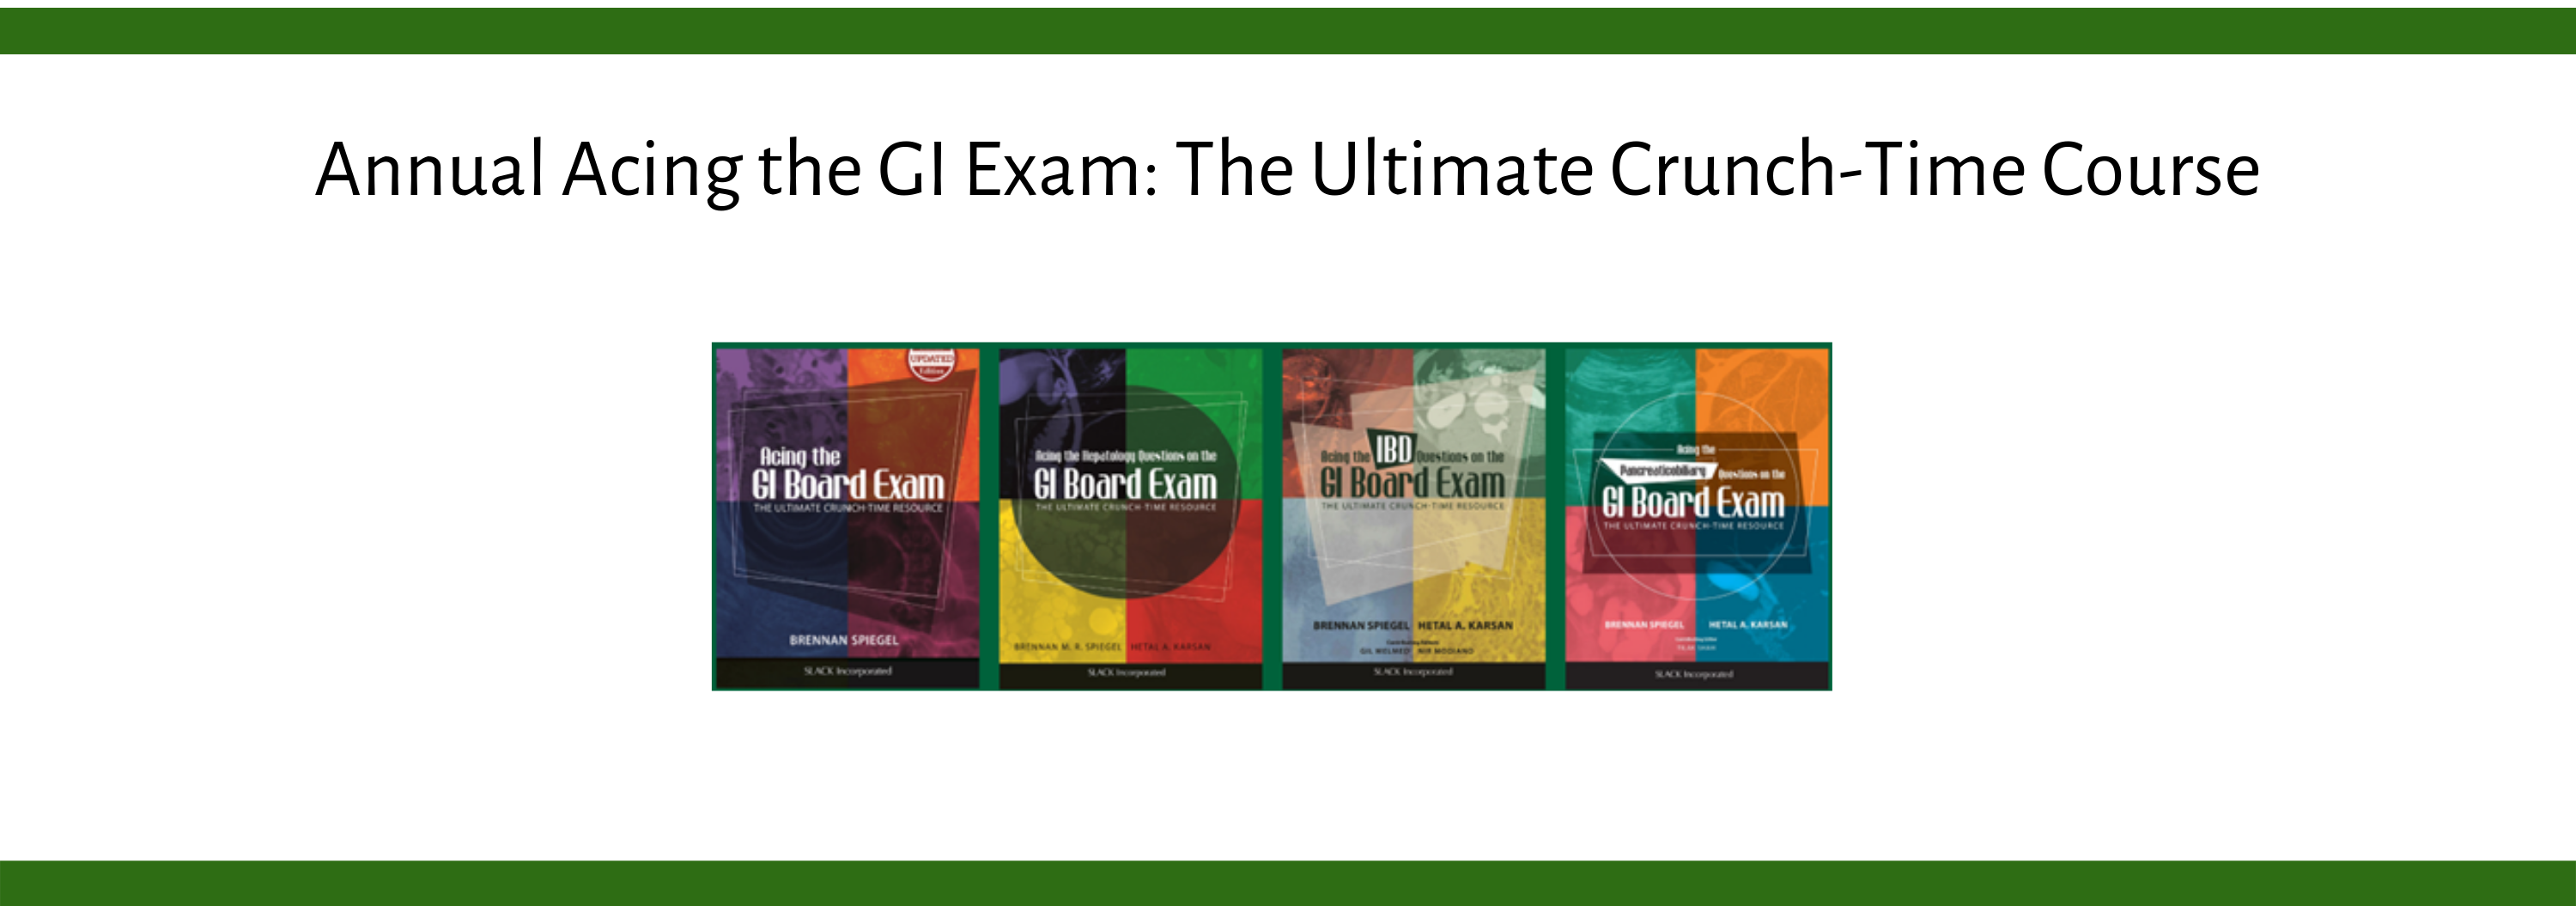 5th Annual Acing the GI Exam: The Ultimate Crunch-Time Course Banner